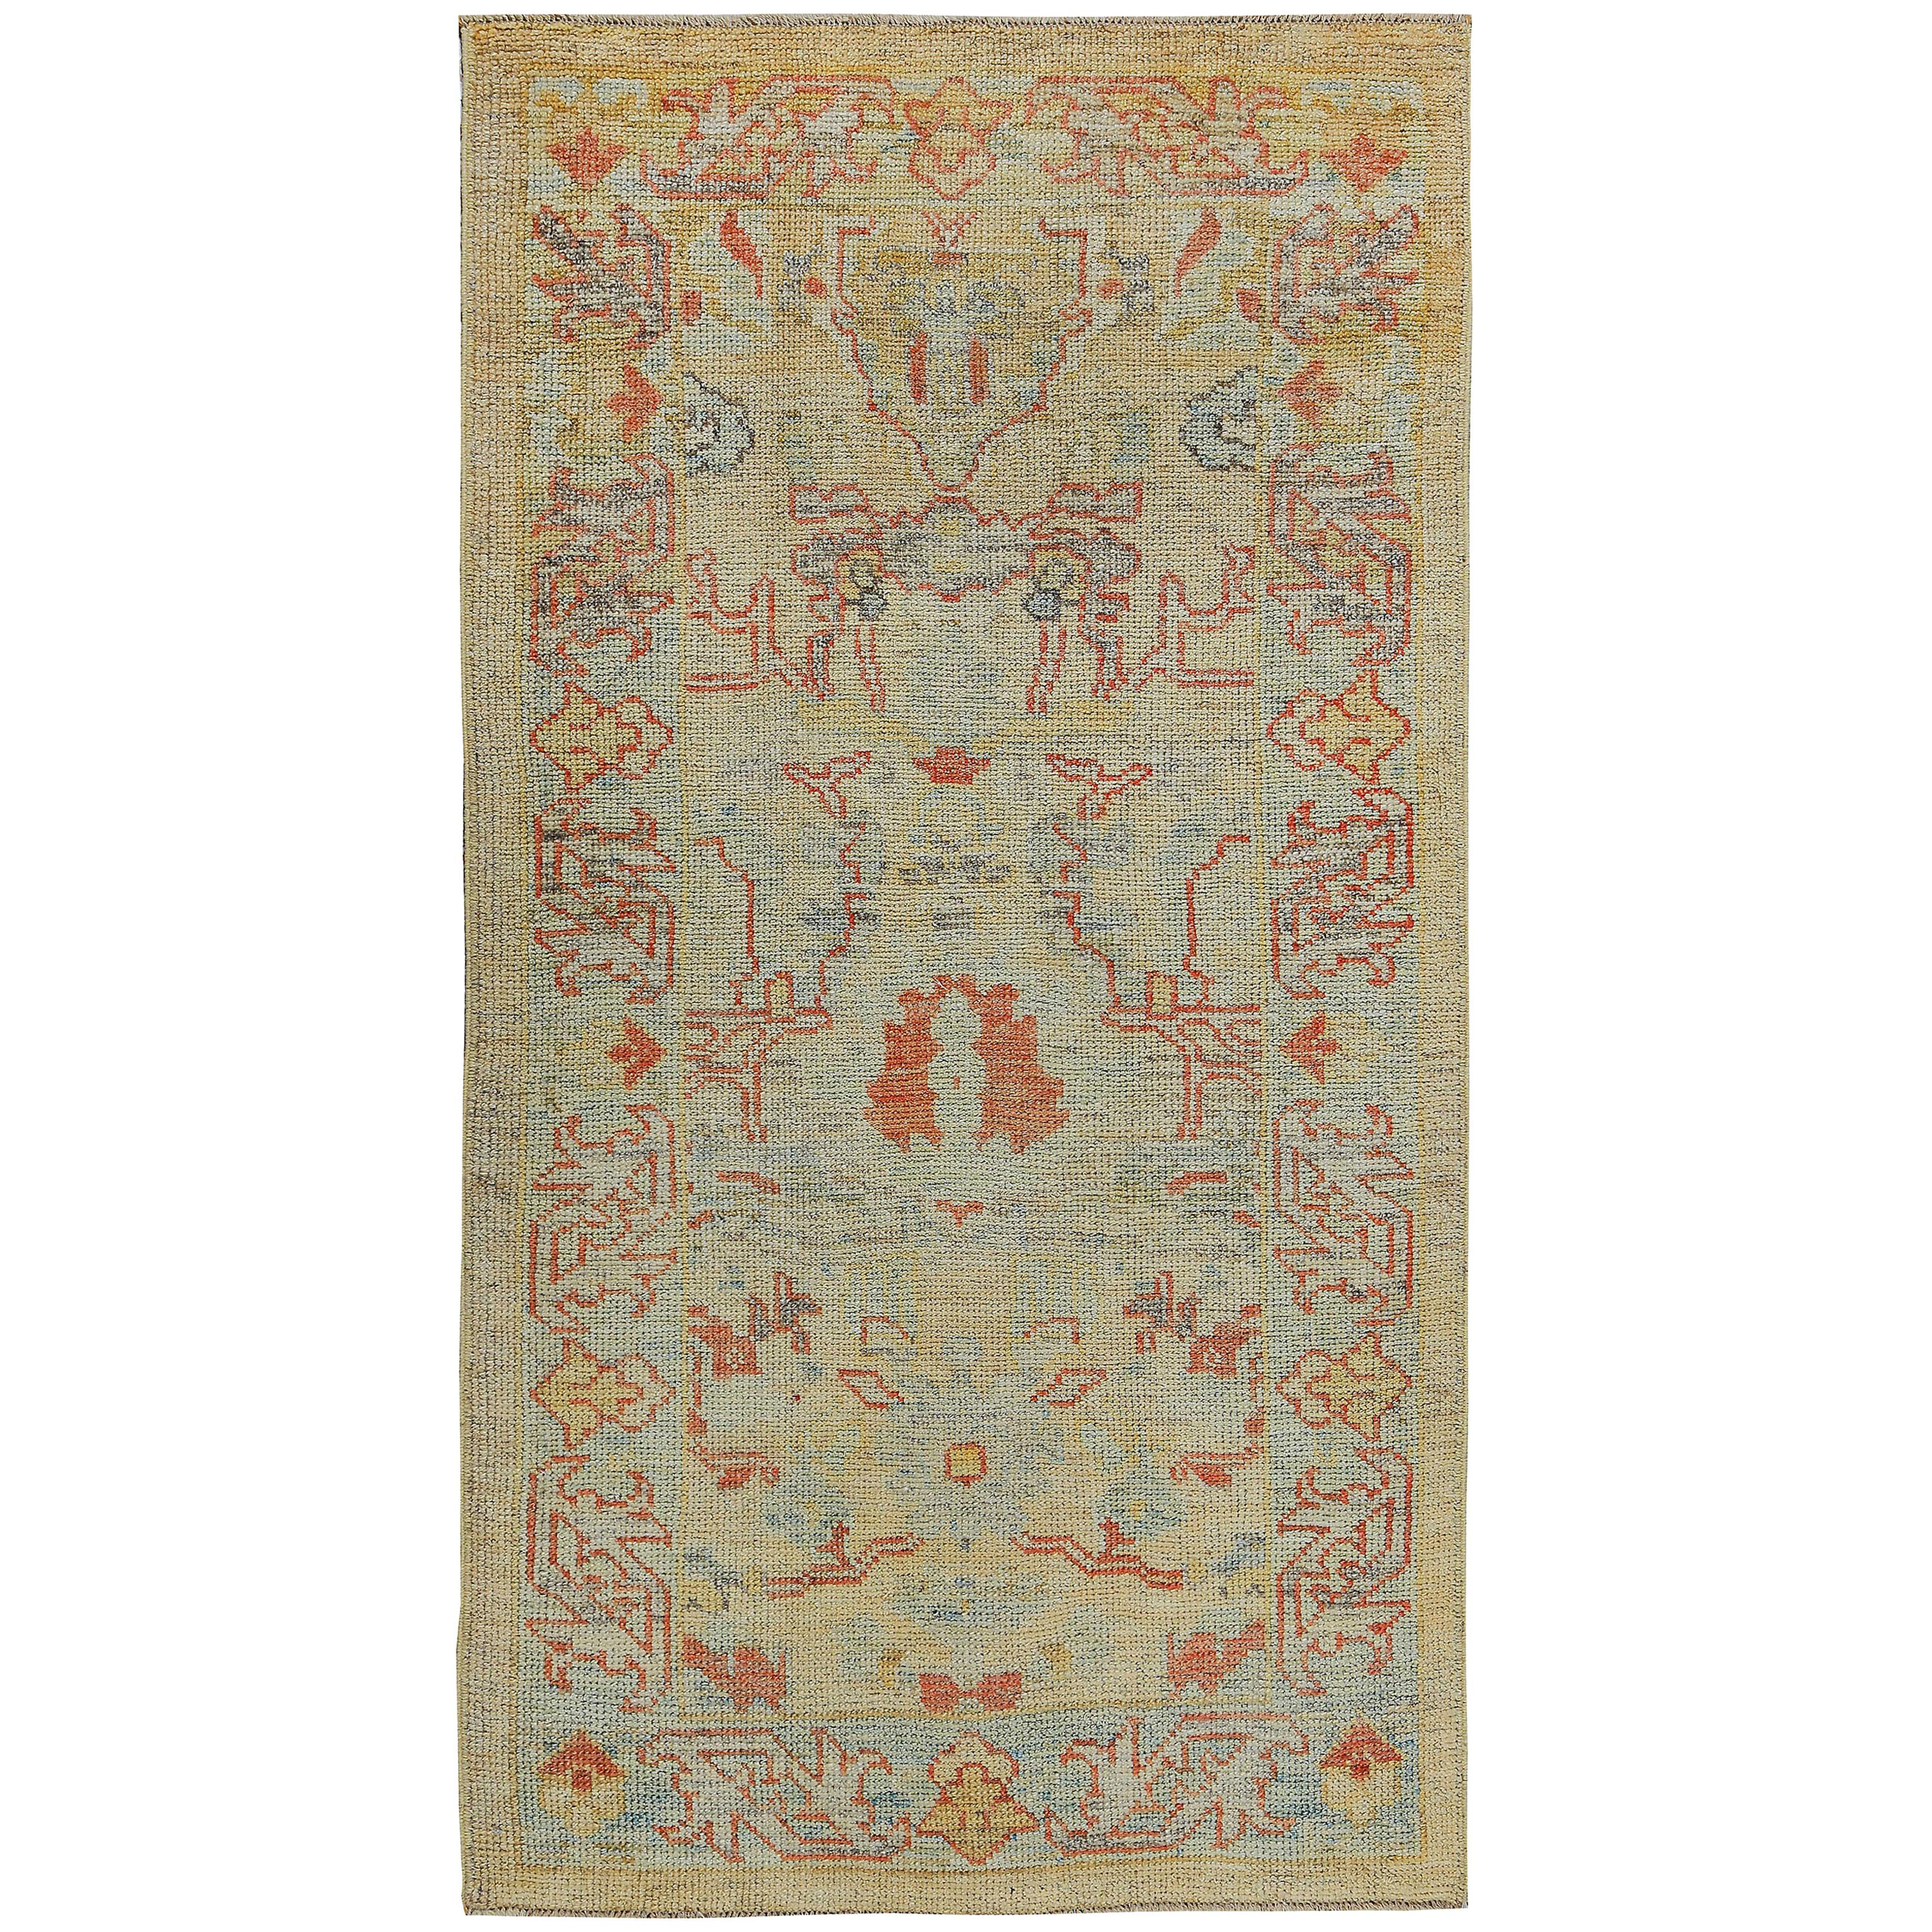 Turkish Oushak Rug with Orange and Gray Floral Details on Ivory Field